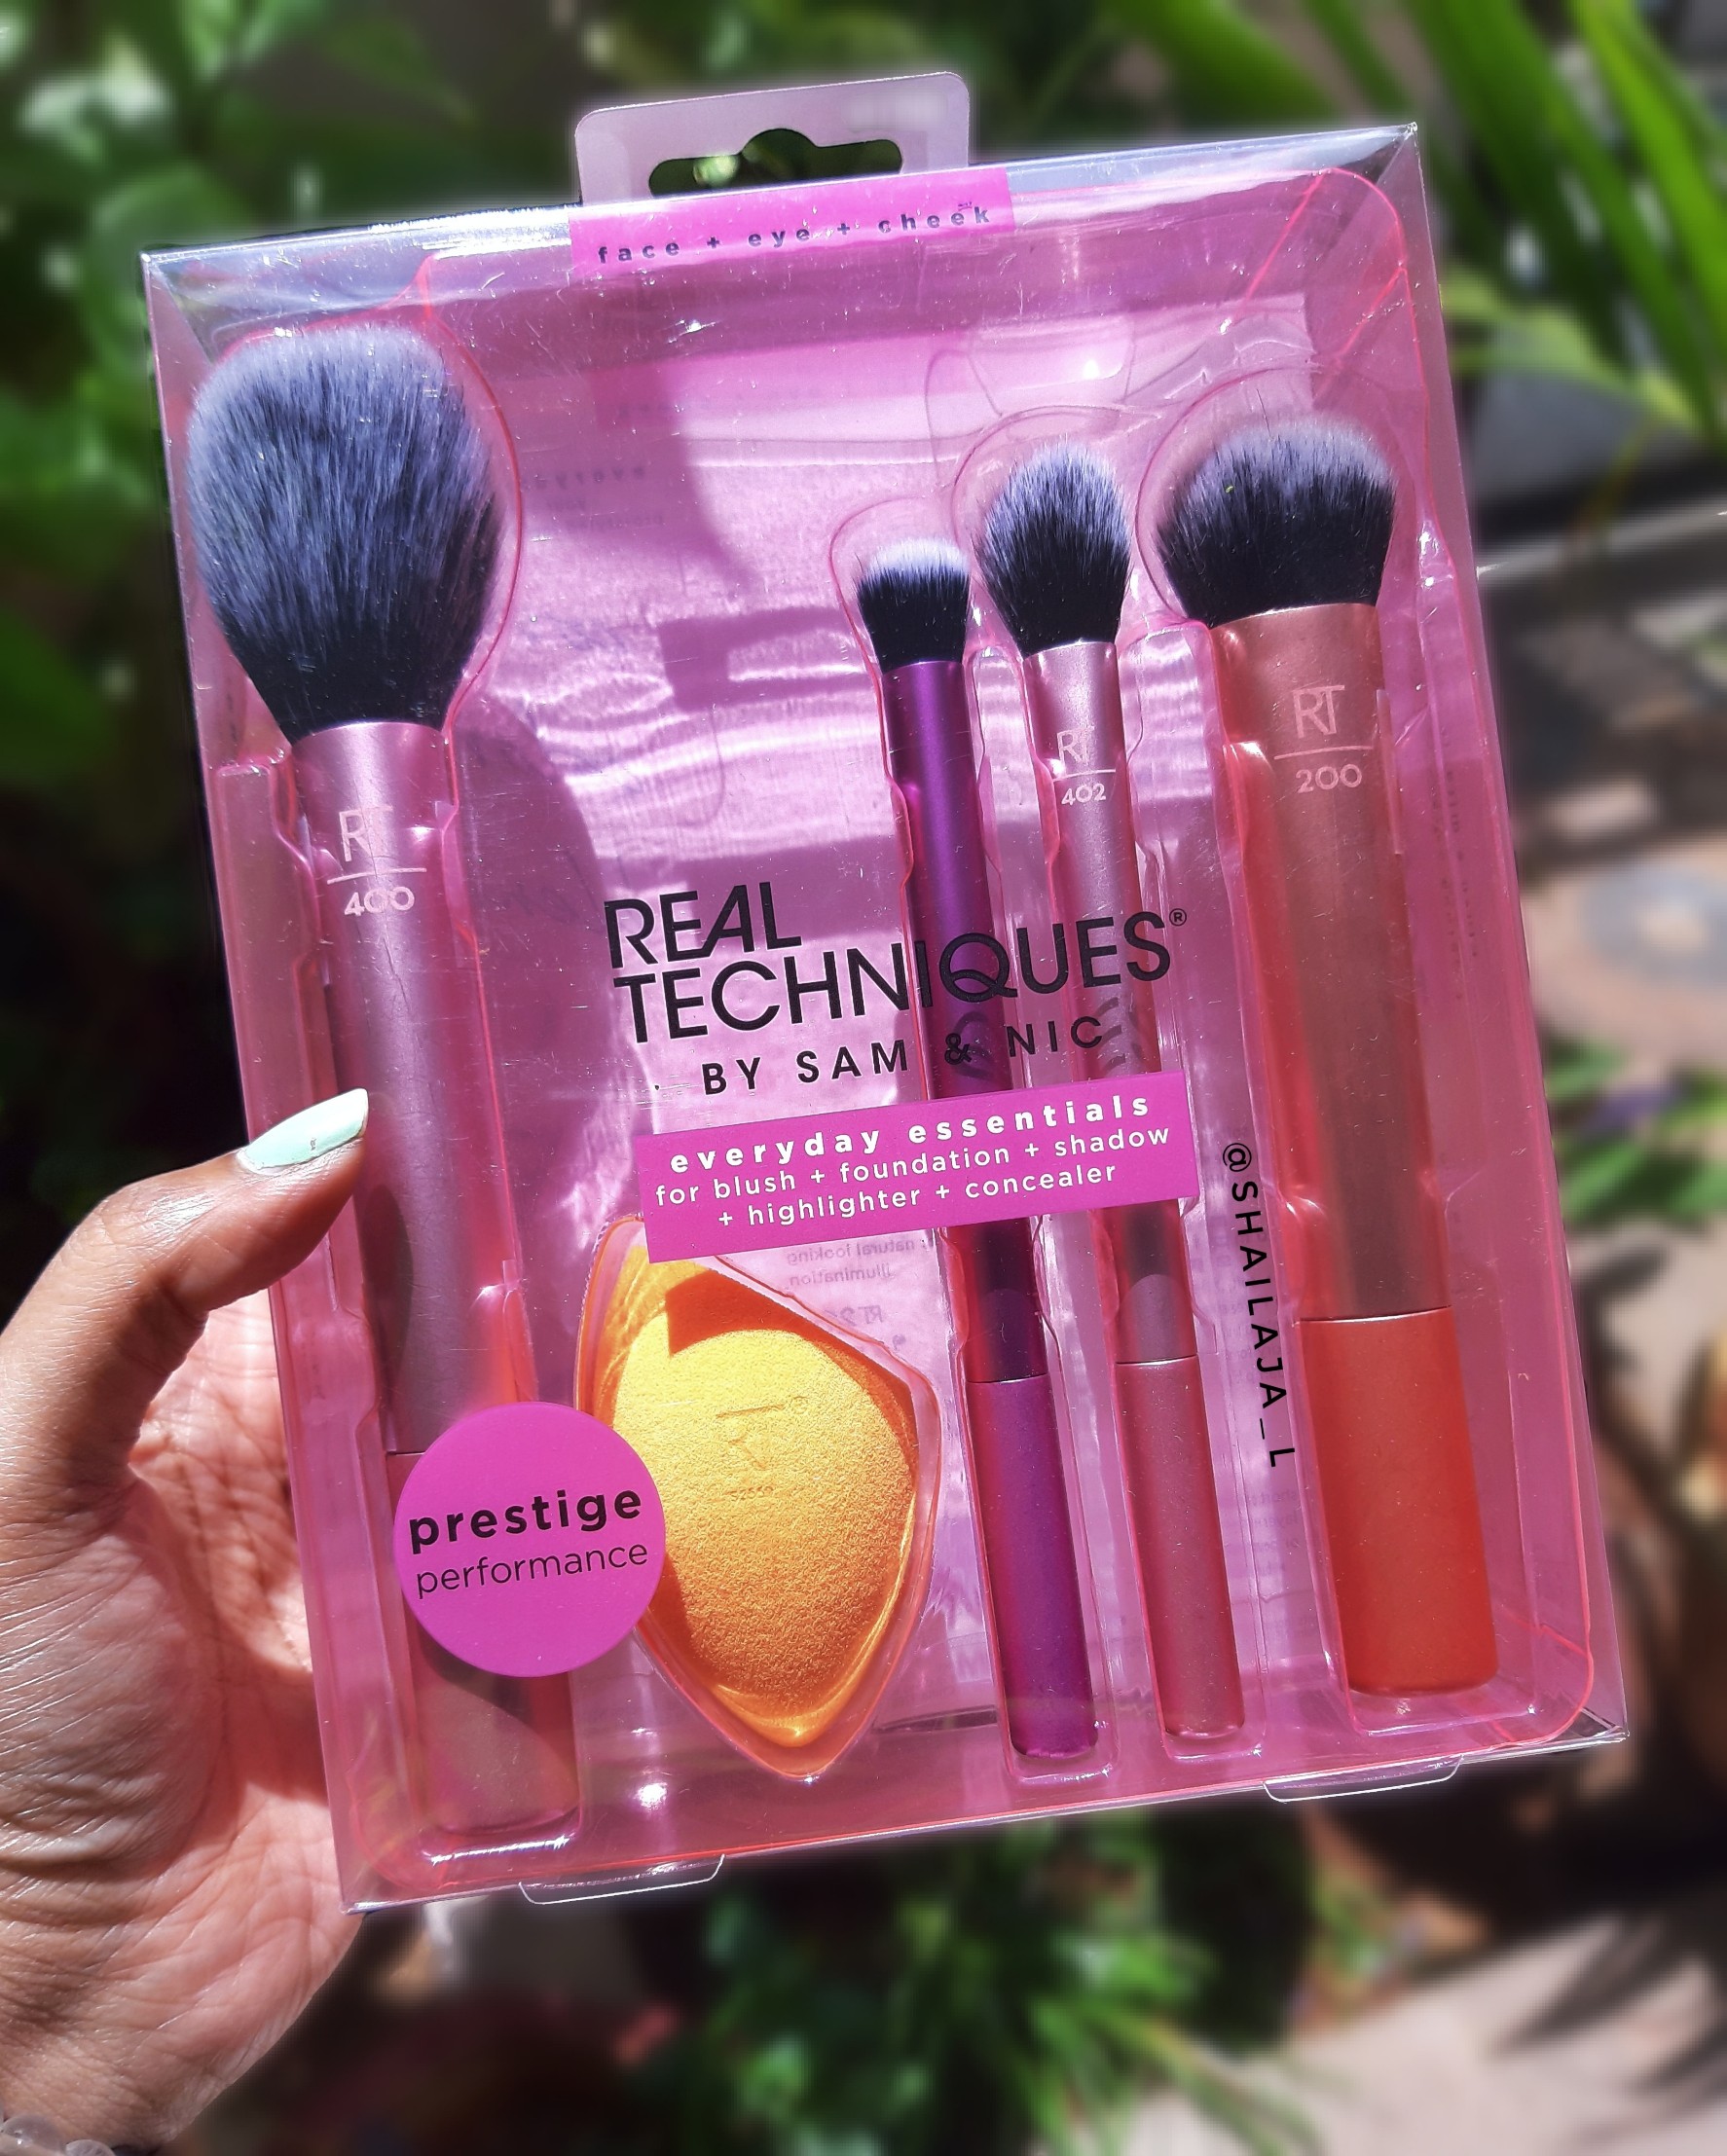 REAL TECHNIQUES EVERYDAY ESSENTIALS MAKEUP BRUSH SET, Review